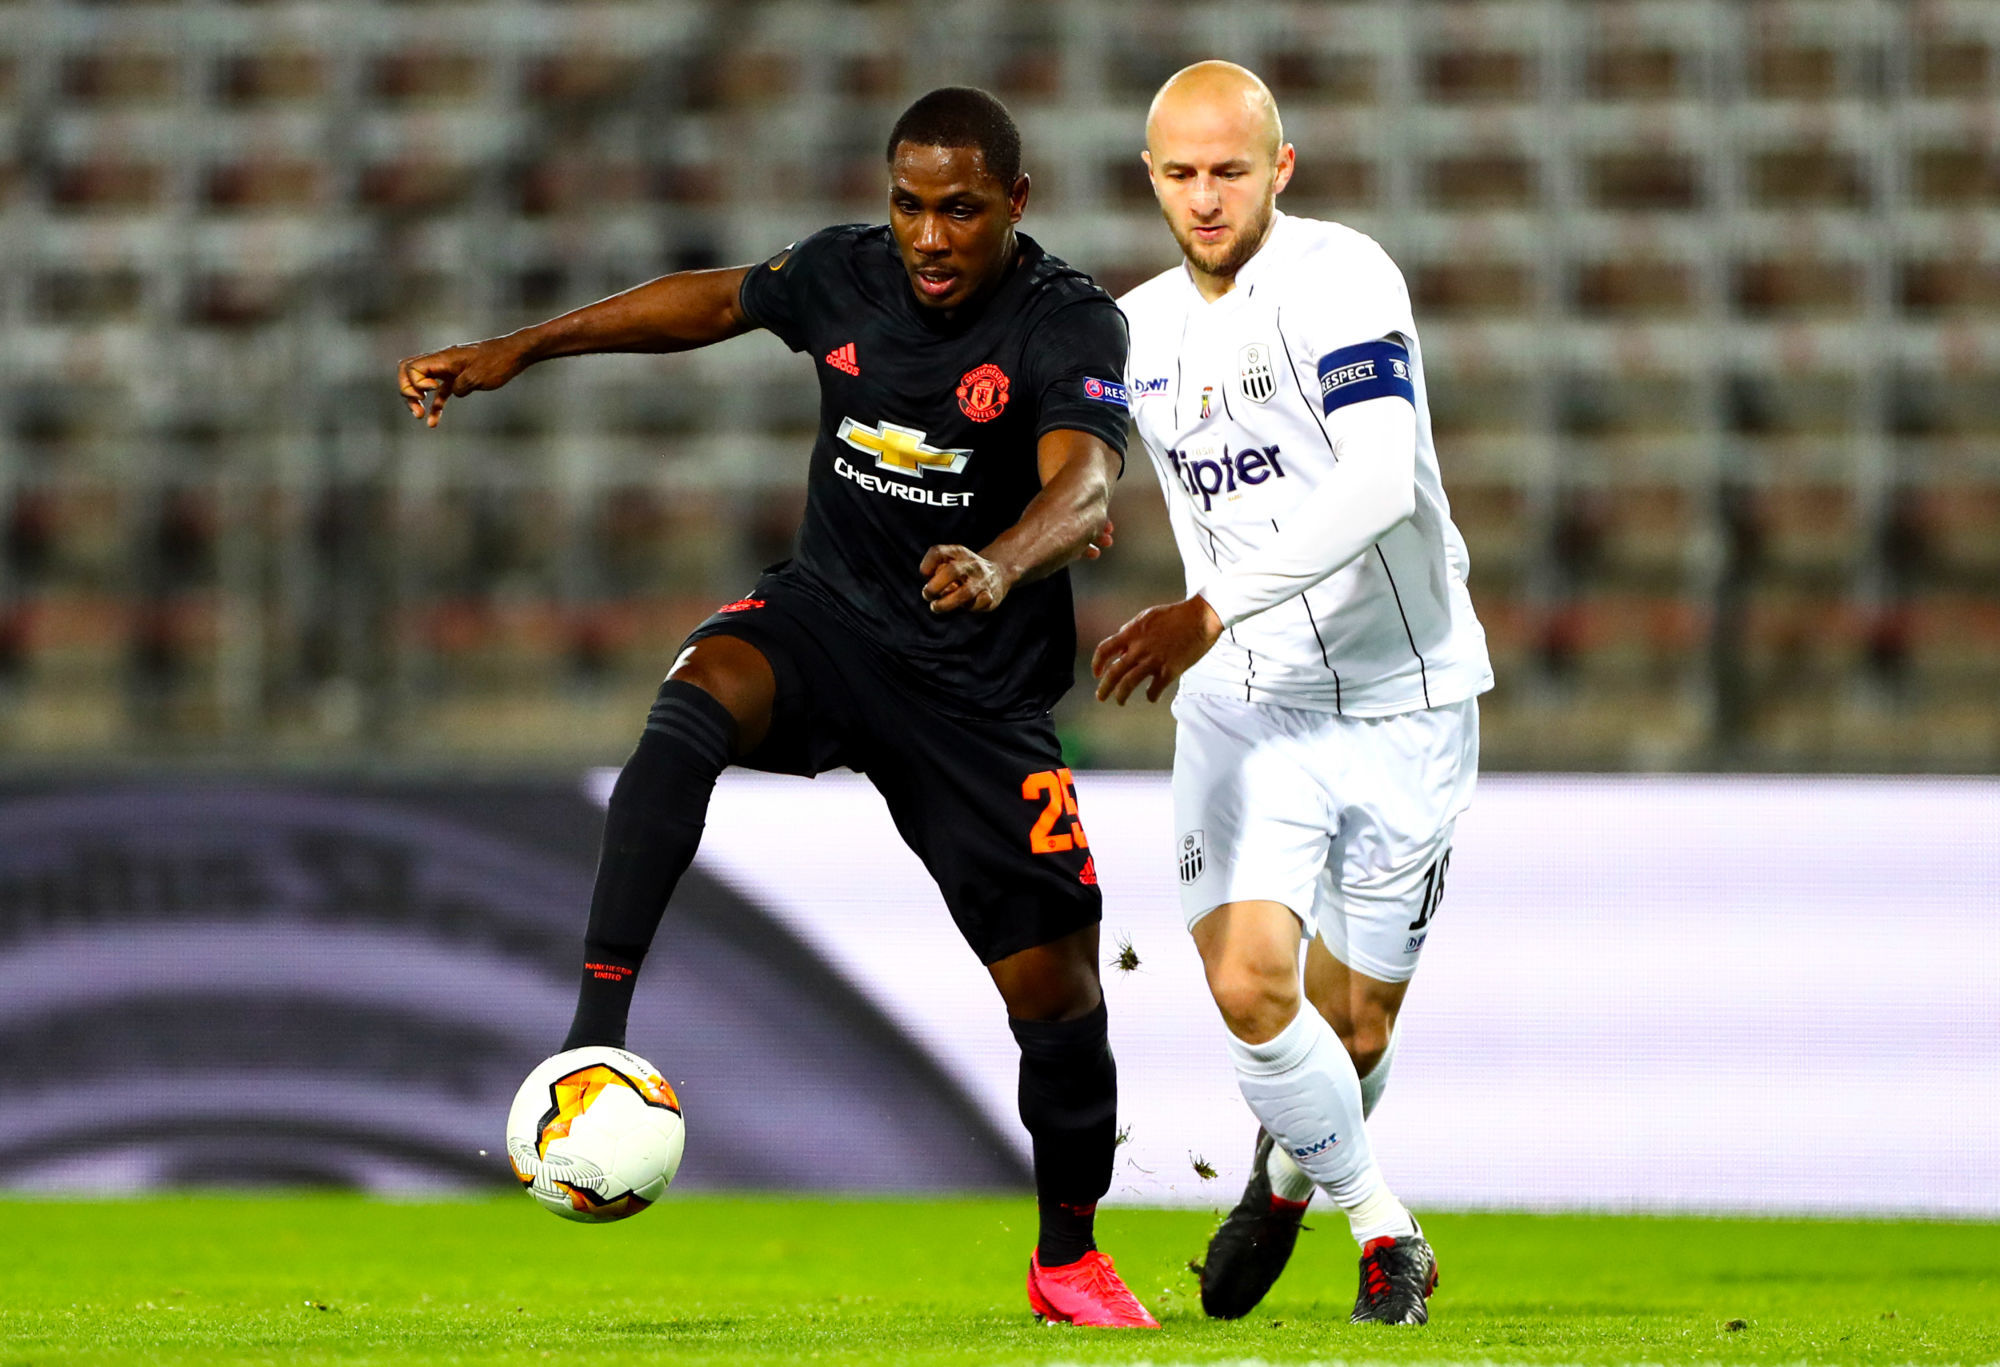 Manchester United's Odion Ighalo (left) and LASK Linz's Gernot Trauner battle for the ball during the UEFA Europa League round of 16 first leg match at Linzer Stadion, Linz. 


Photo by Icon Sport - Gernot TRAUNER - Odion IGHALO - Linzer Stadion - Linz (Autriche)